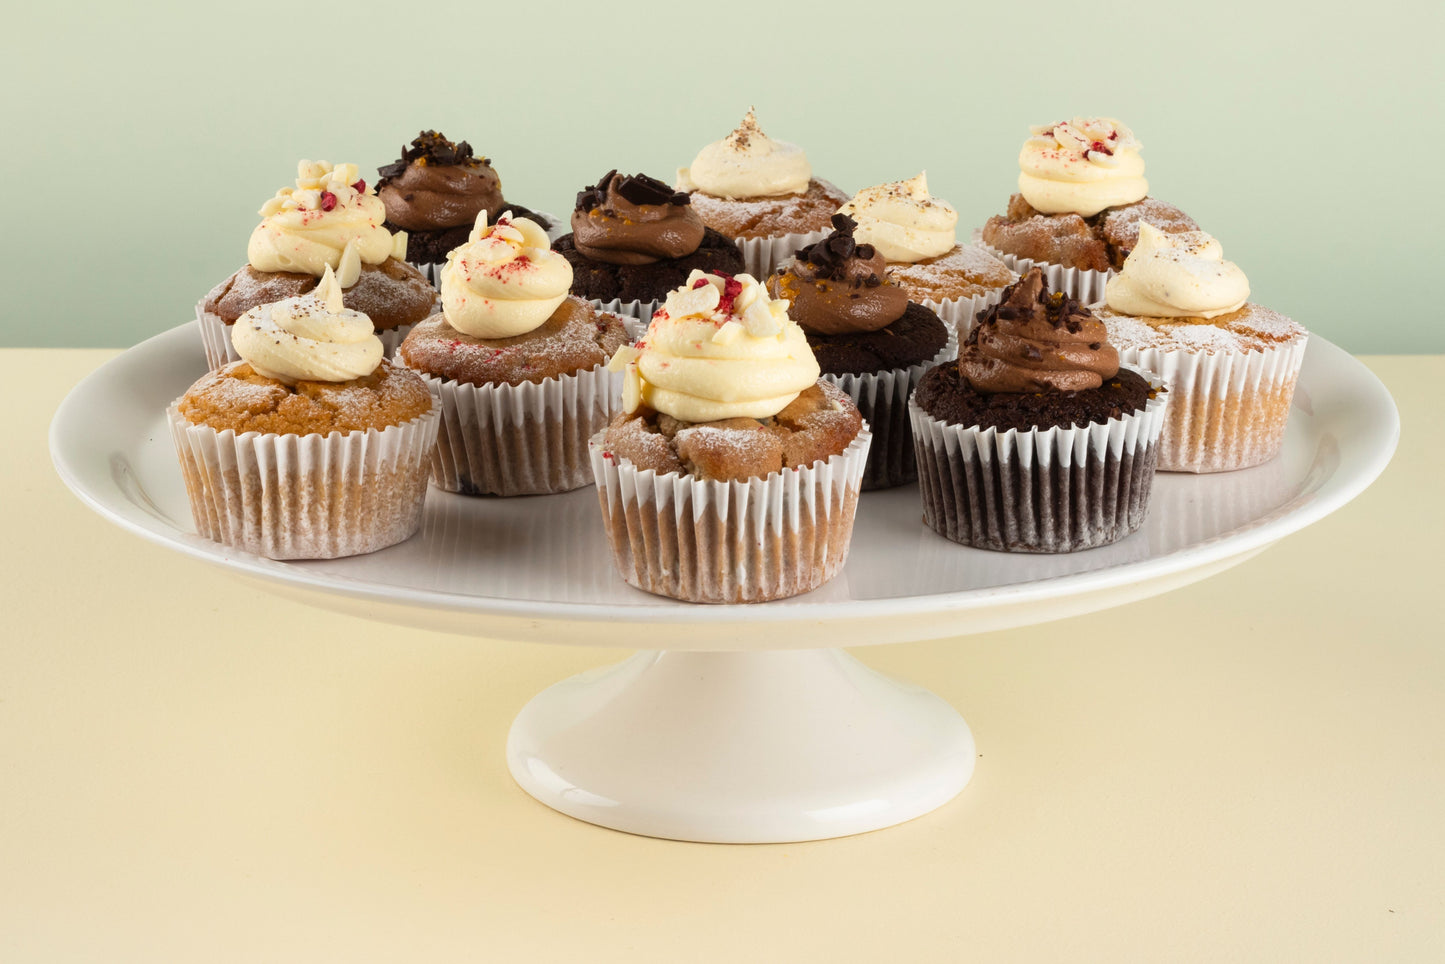 Assorted cupcakes (12 pack)